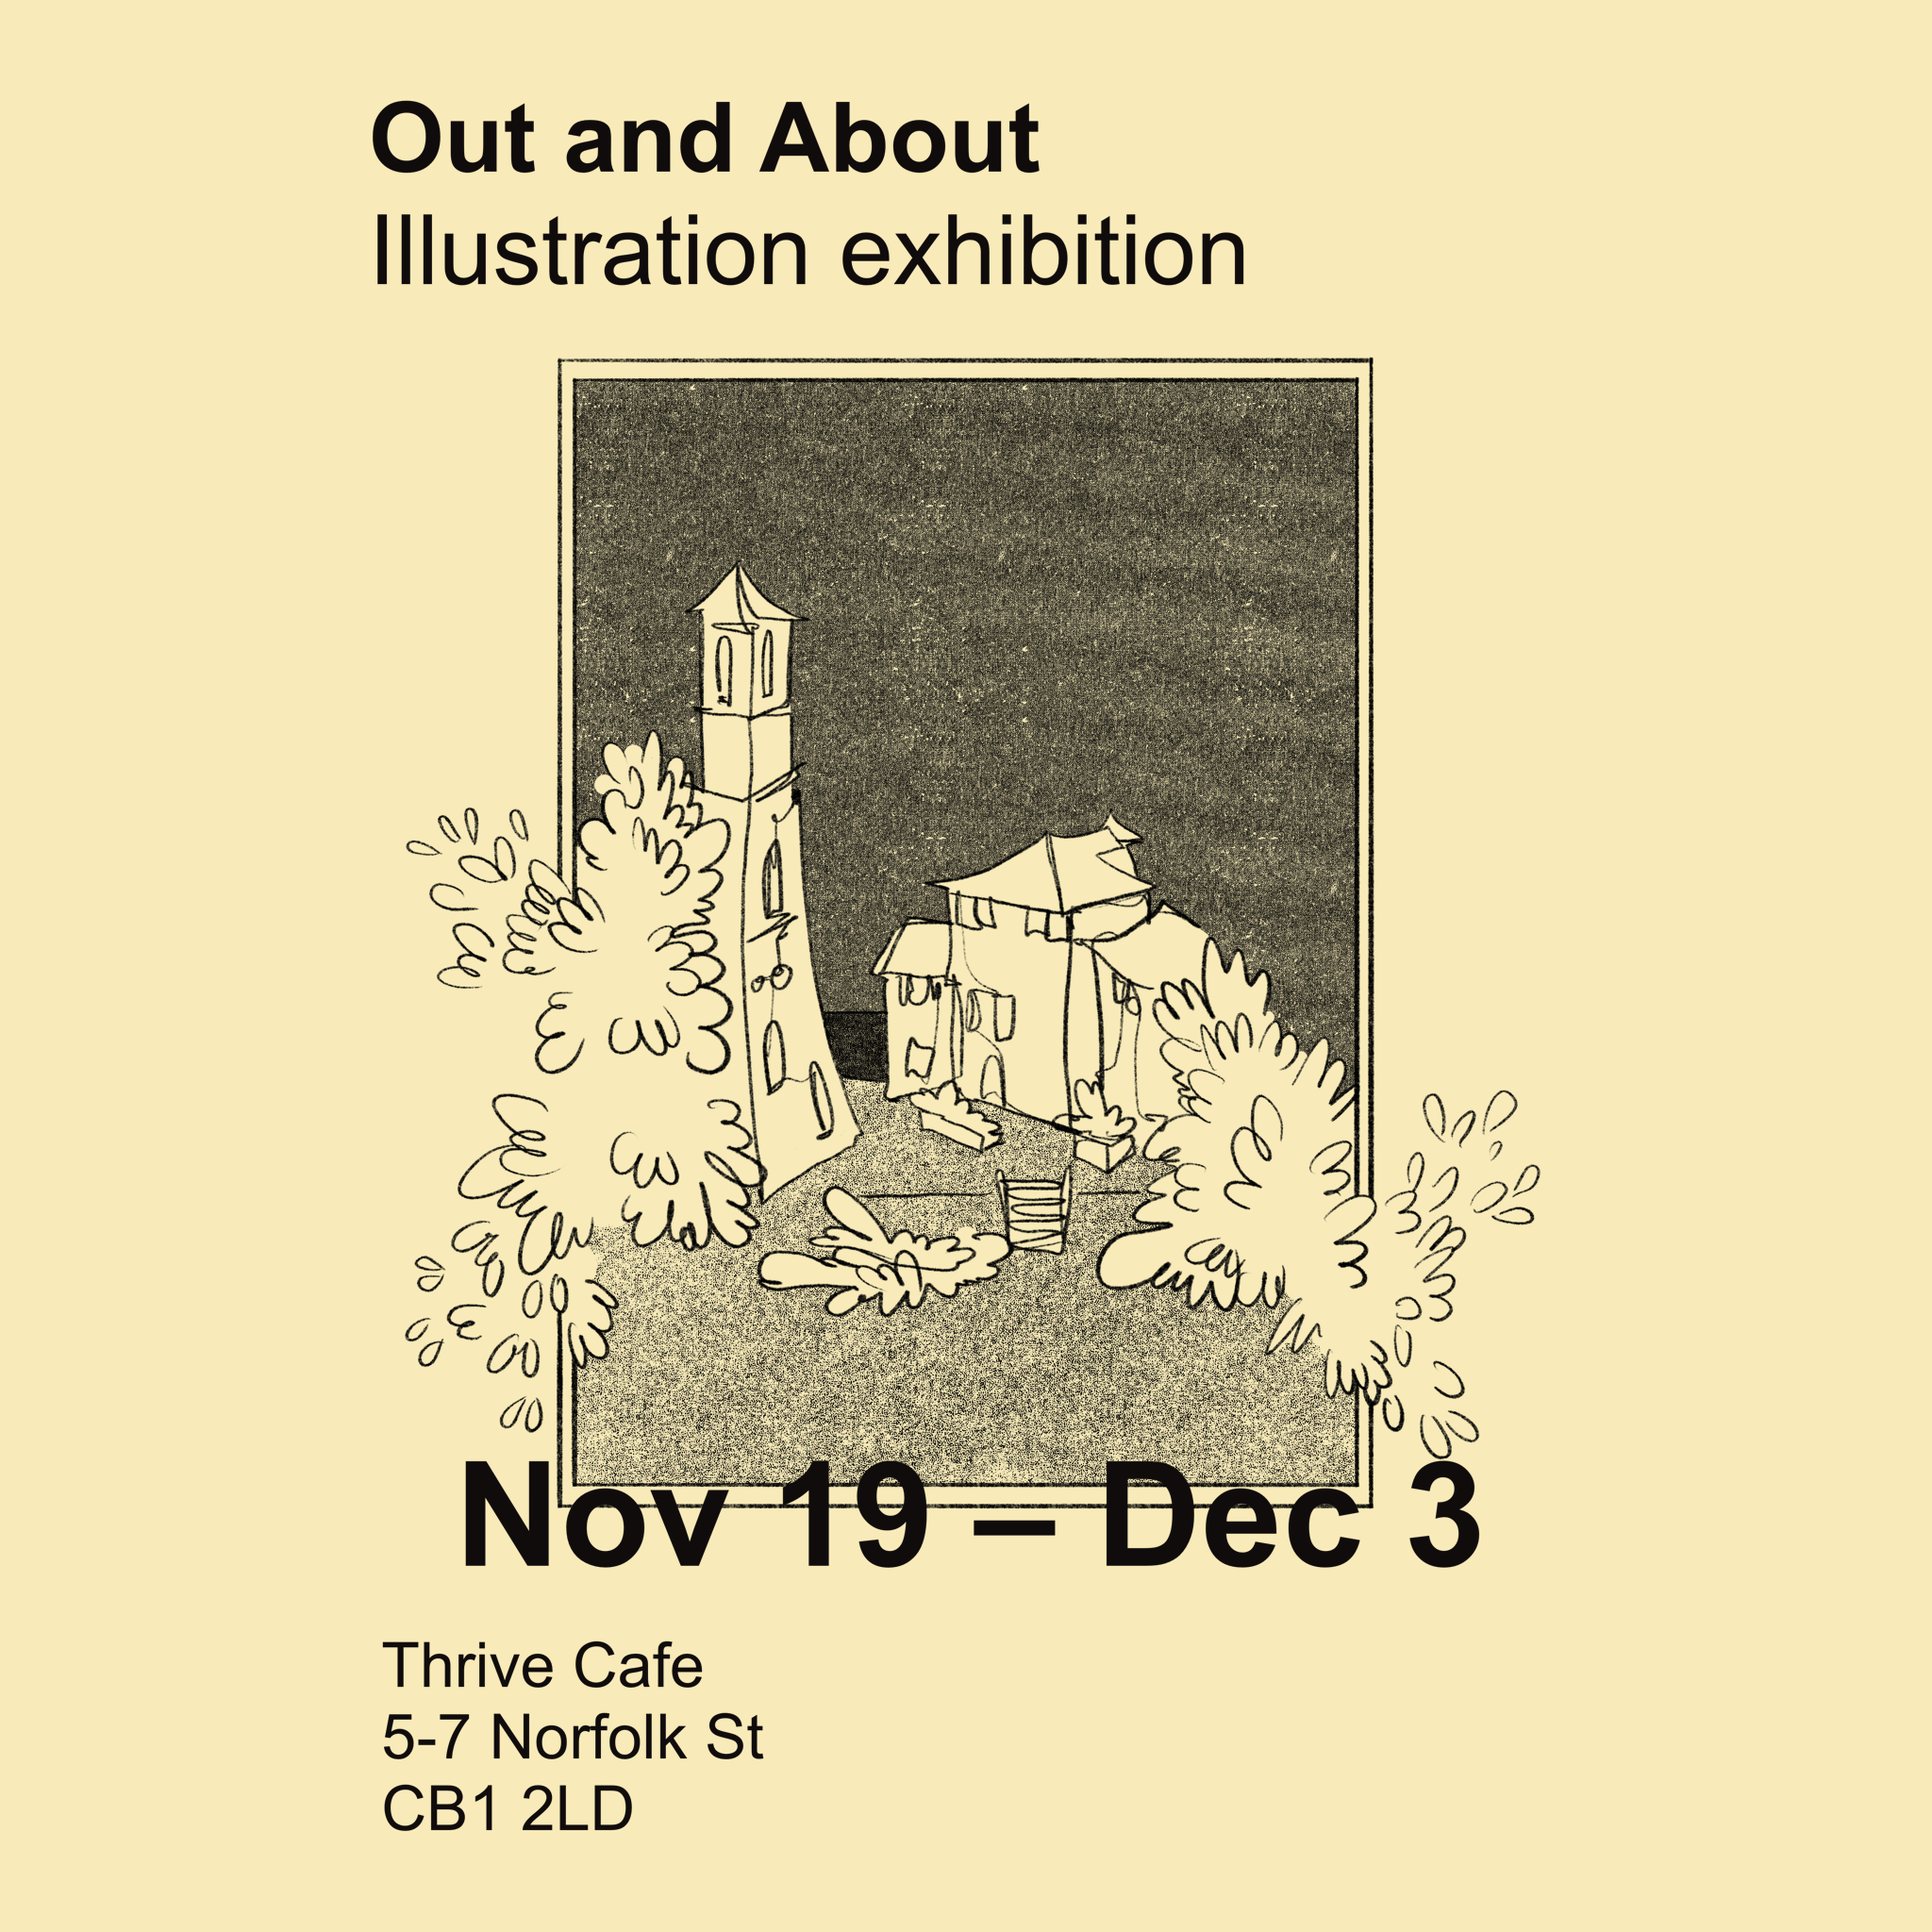 Out and About Illustration exhibition poster.